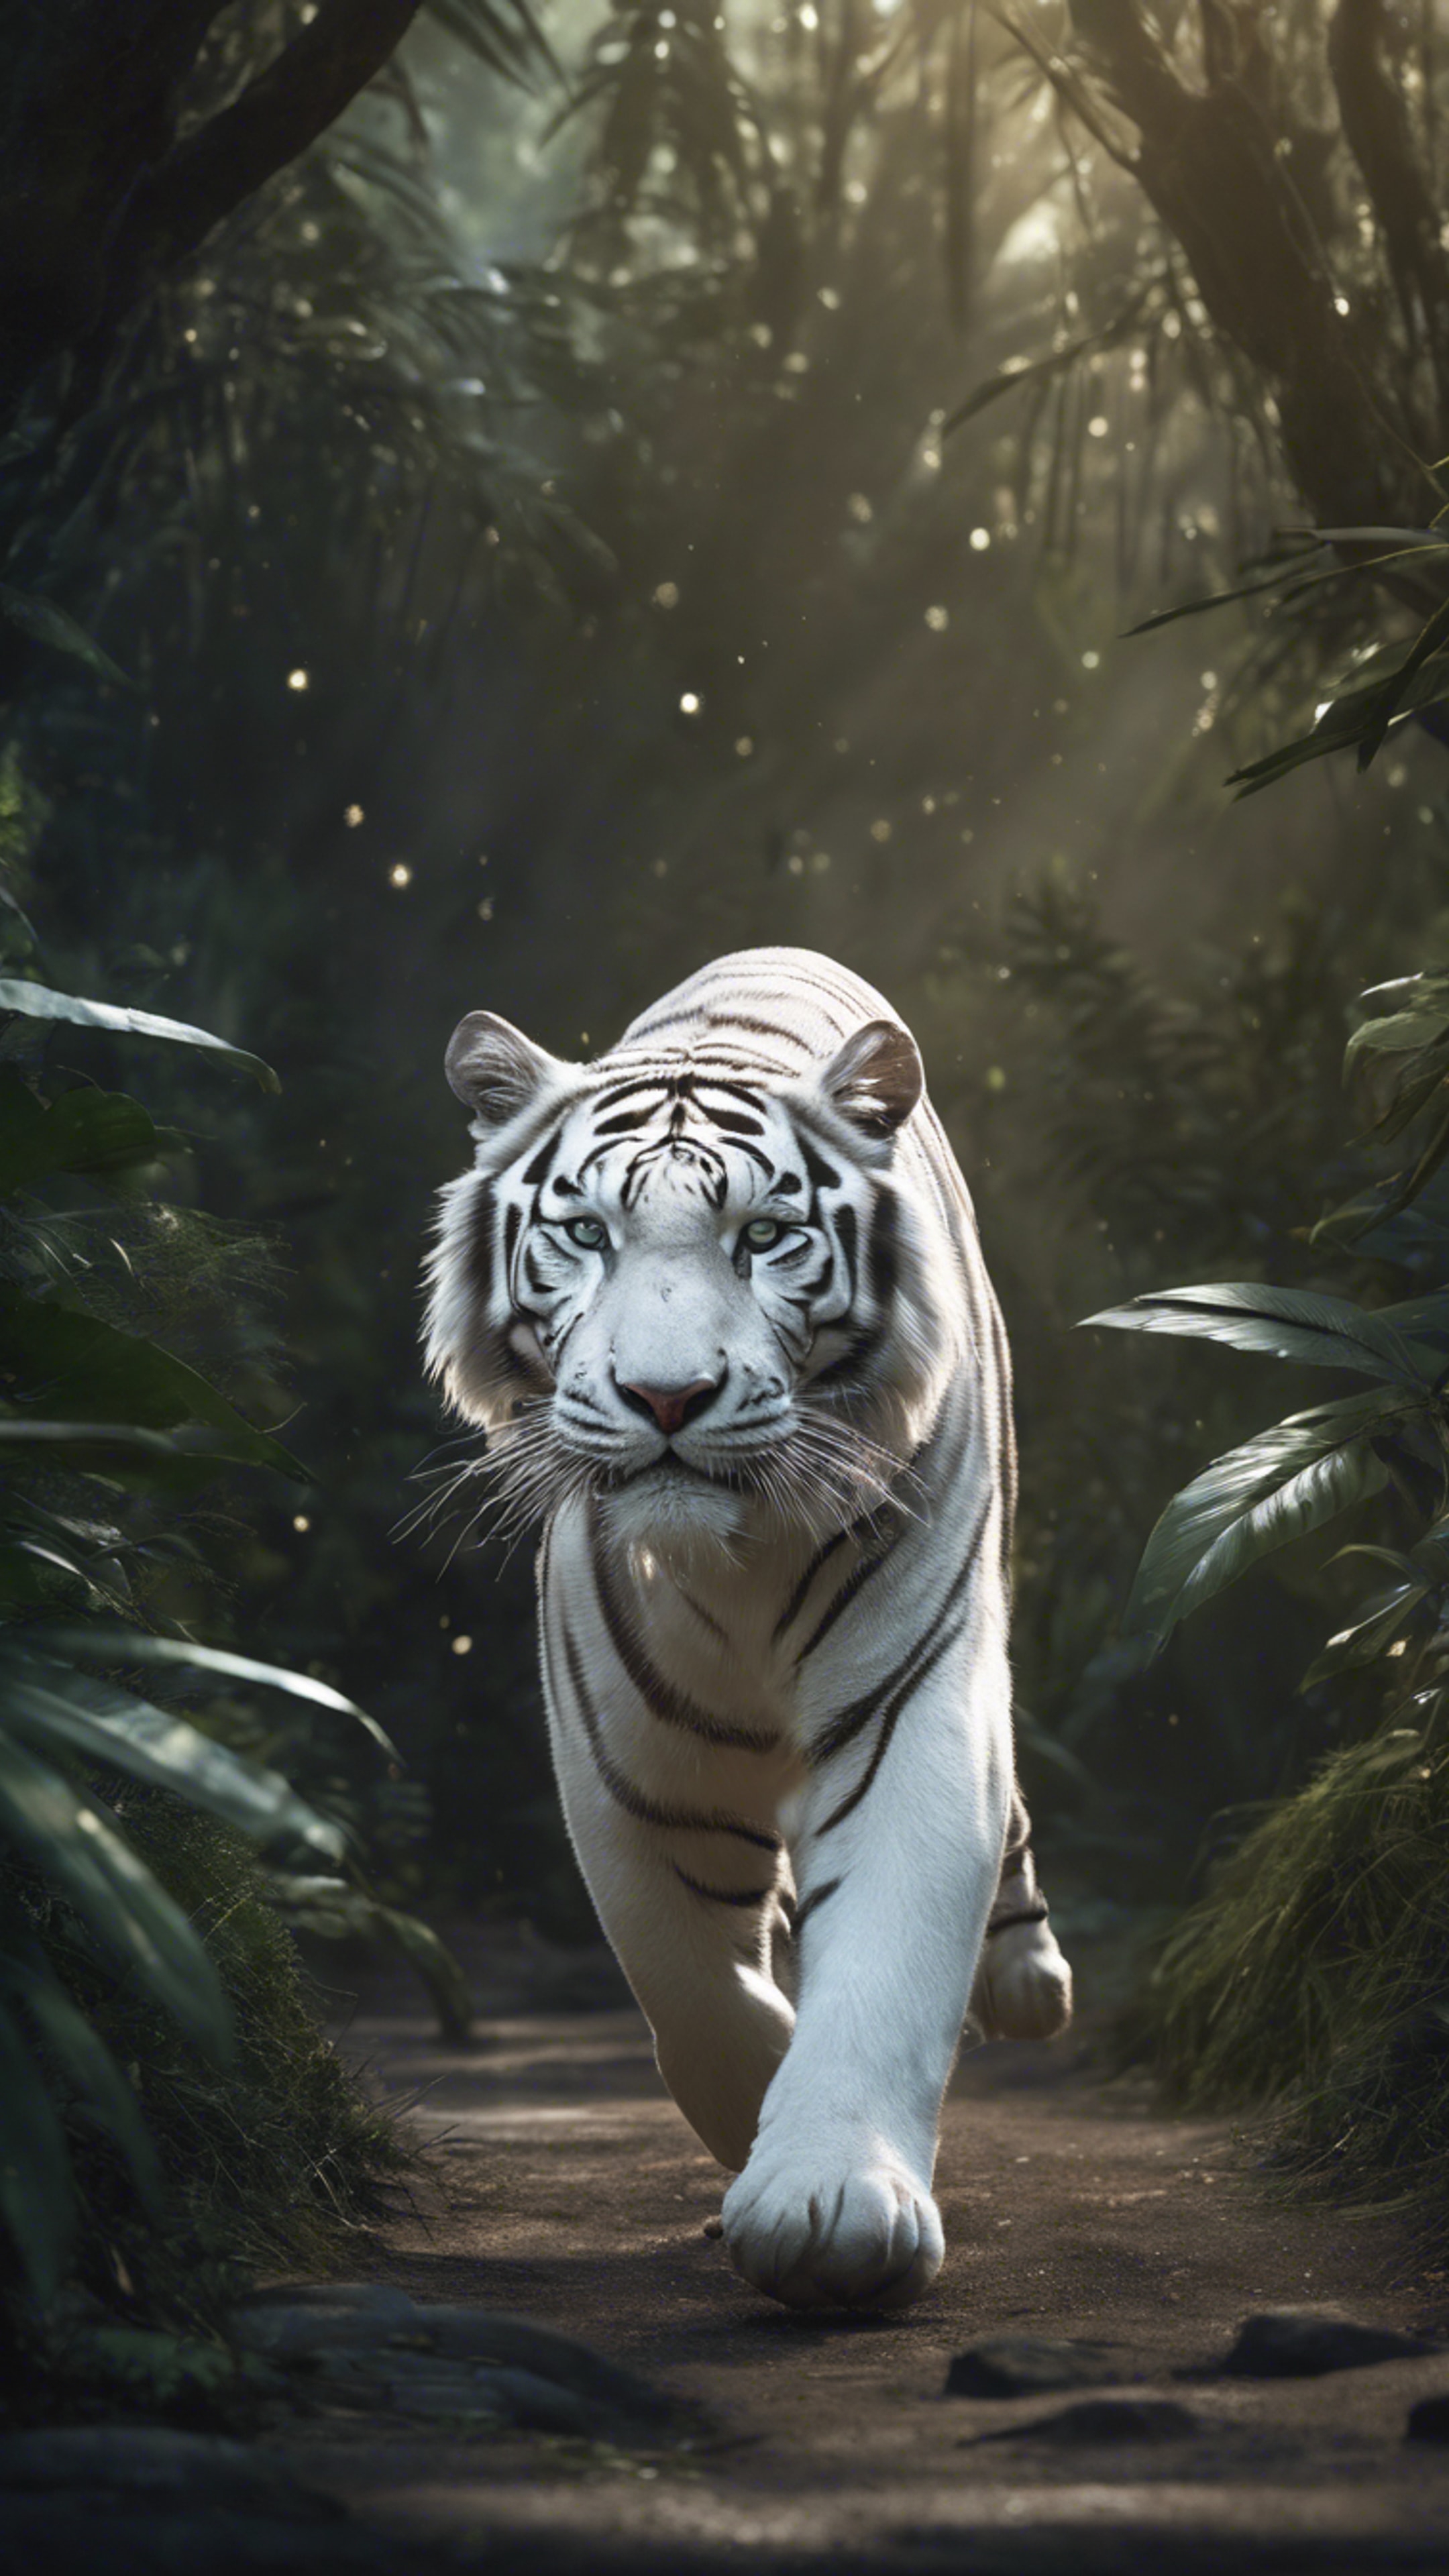 A cool white tiger, with silver stripes, strides powerfully through a moonlit jungle. Wallpaper[5d9925a4be334da199e0]